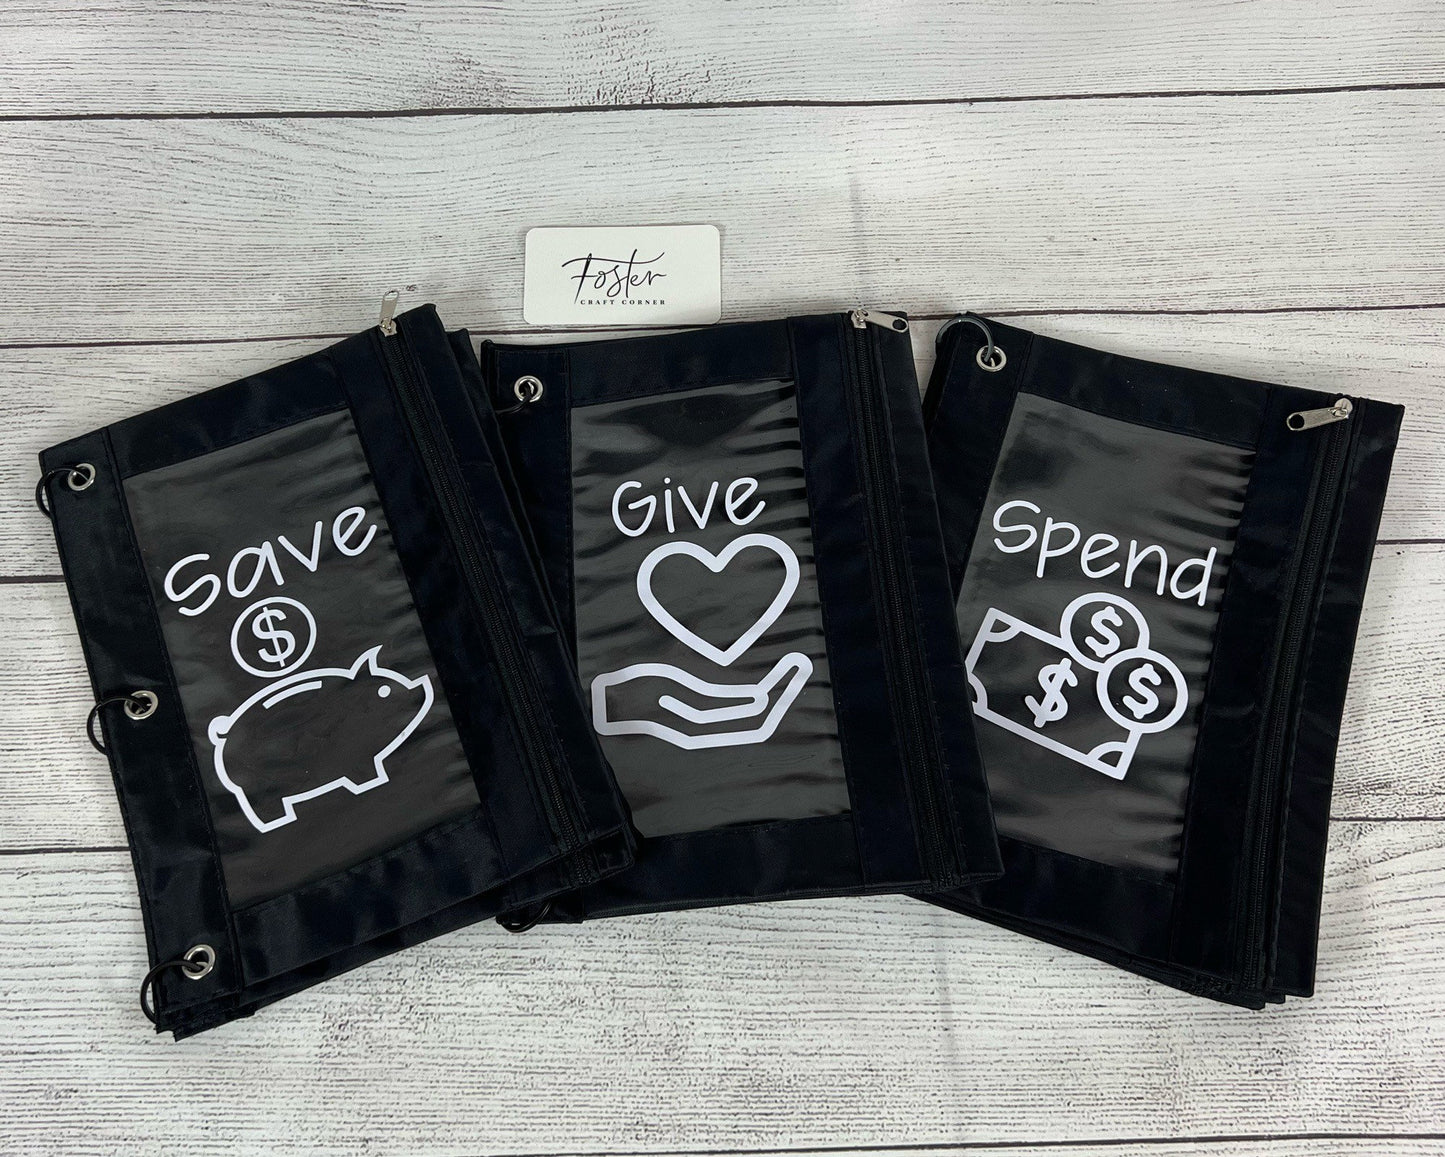 Extra Envelope Pouches - Save - Spend - Give - Money - Lesson - Teaching - Personalize - Money Bucket - Philosophy - Clear - Custom - Add on